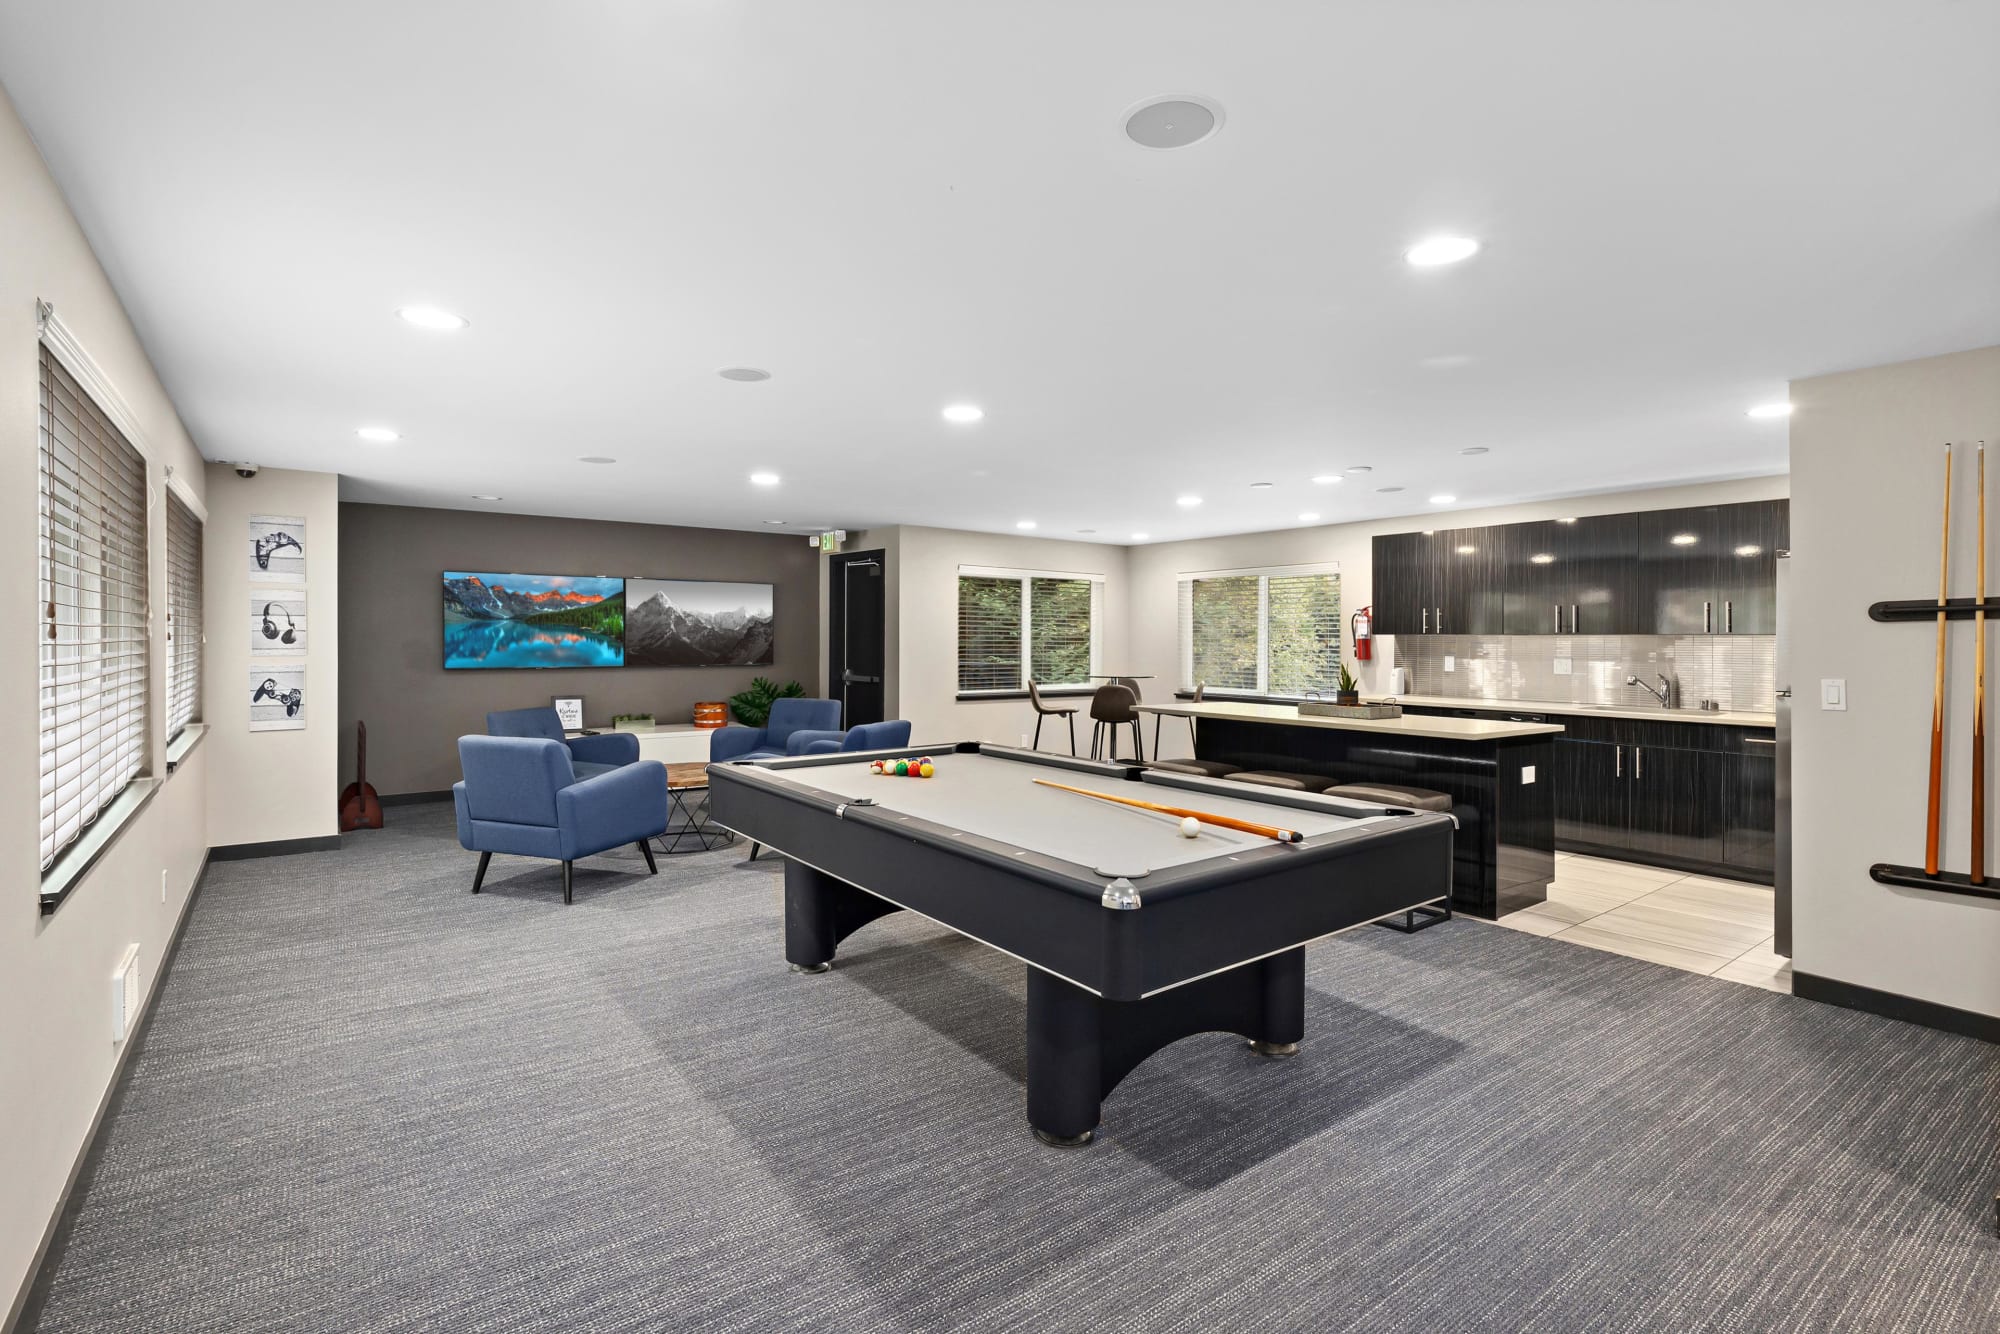 Game room with a pool table at Karbon Apartments in Newcastle, Washington